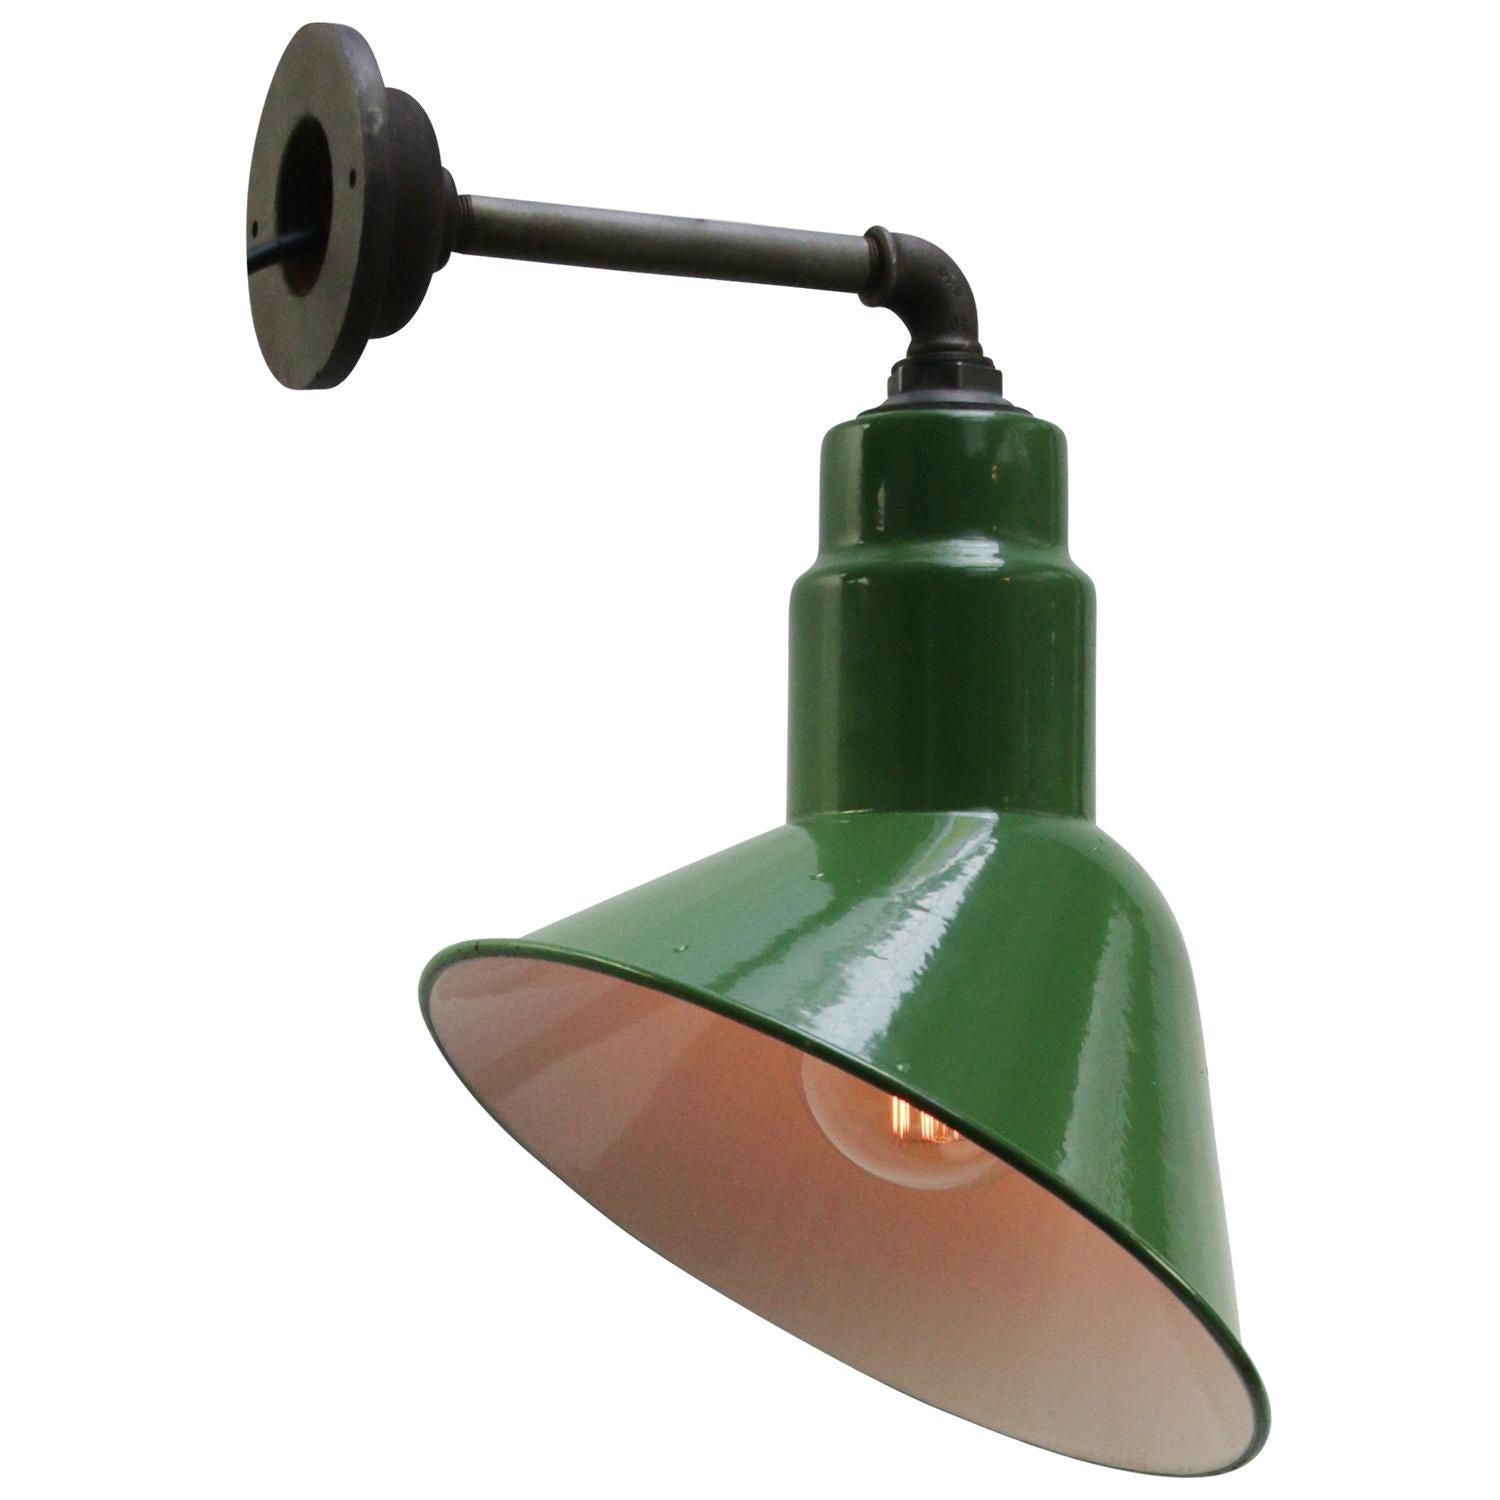 American factory wall light by ABOLITE USA
The Jones Metal Products Company, Ohio, USA
Green enamel, white interior

diameter cast iron wall piece: 10 cm, 2 holes to secure

Weight: 2.00 kg / 4.4 lb

Priced per individual item. All lamps